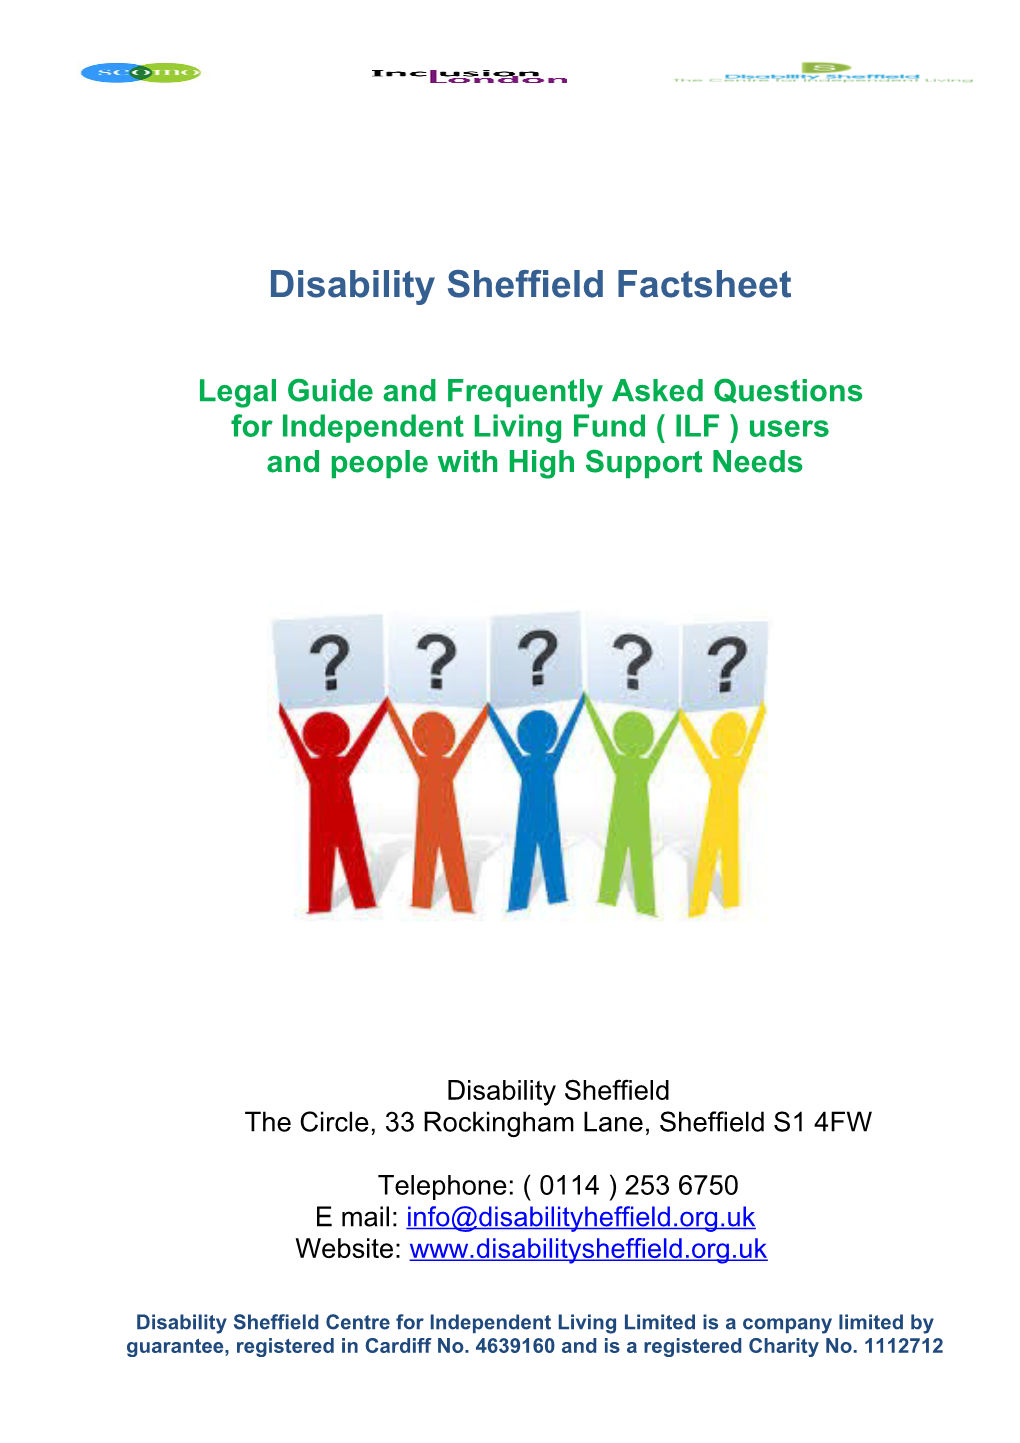 Legal Guide and Frequently Asked Questions